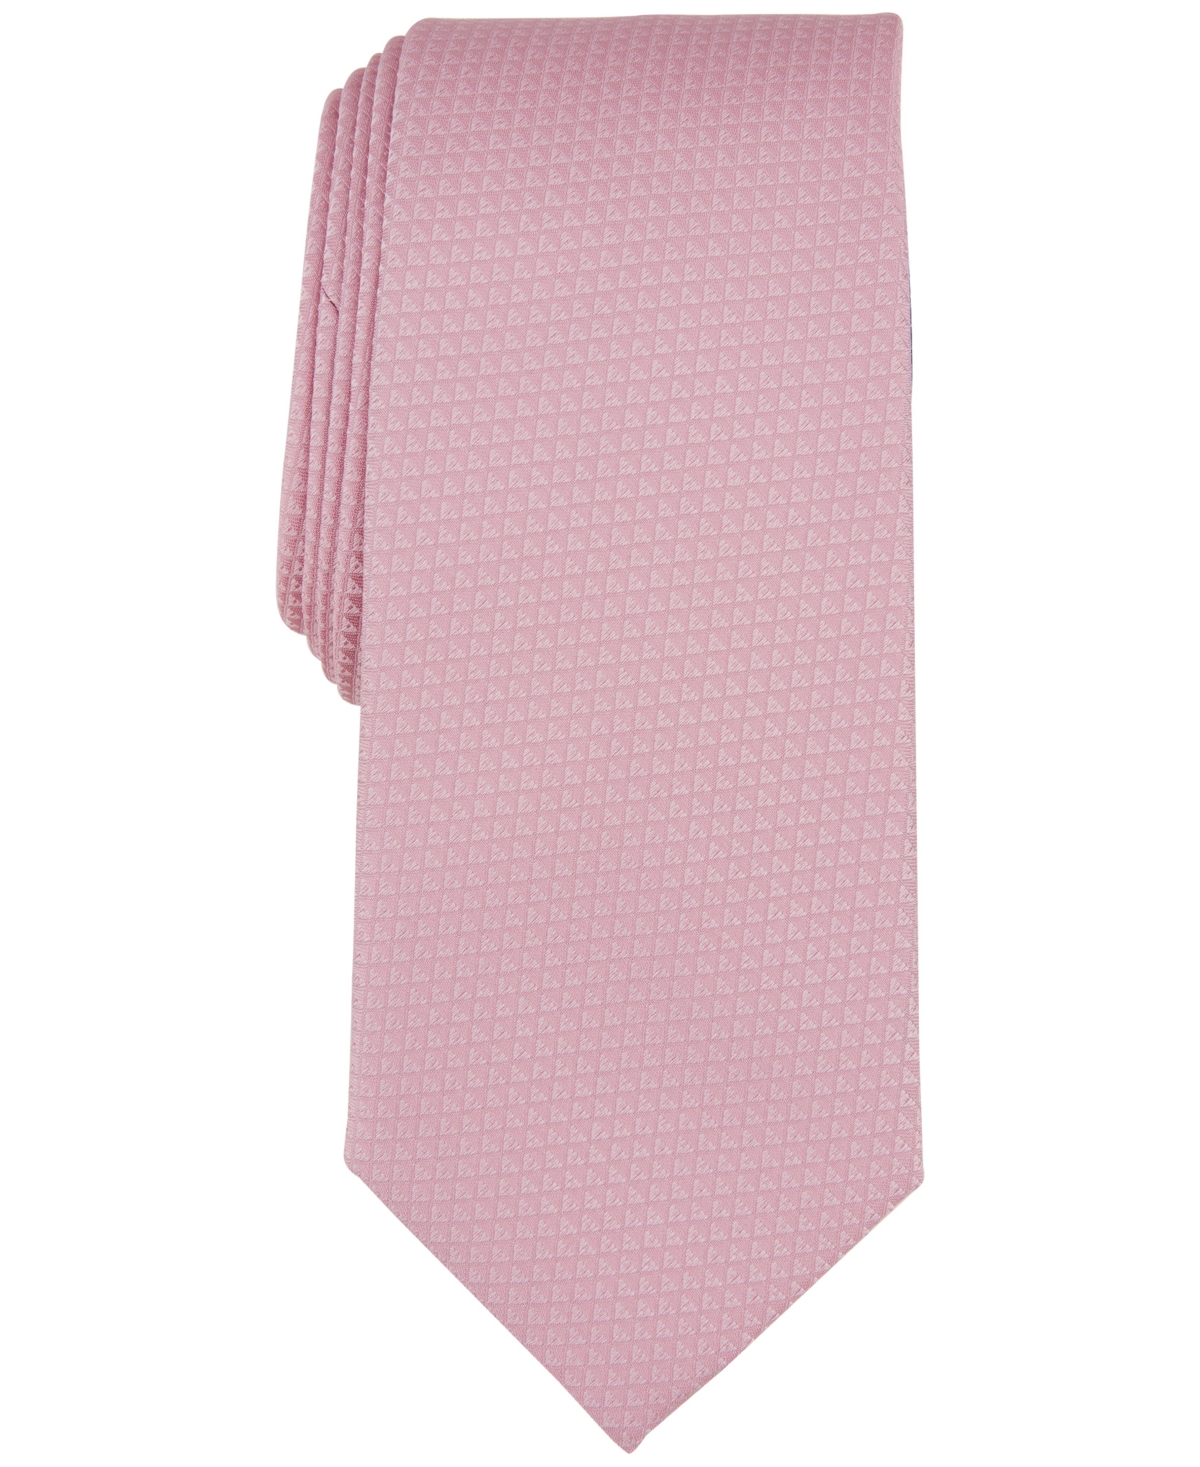 Men's Windhill Solid Tie, Created for Macy's - Pink